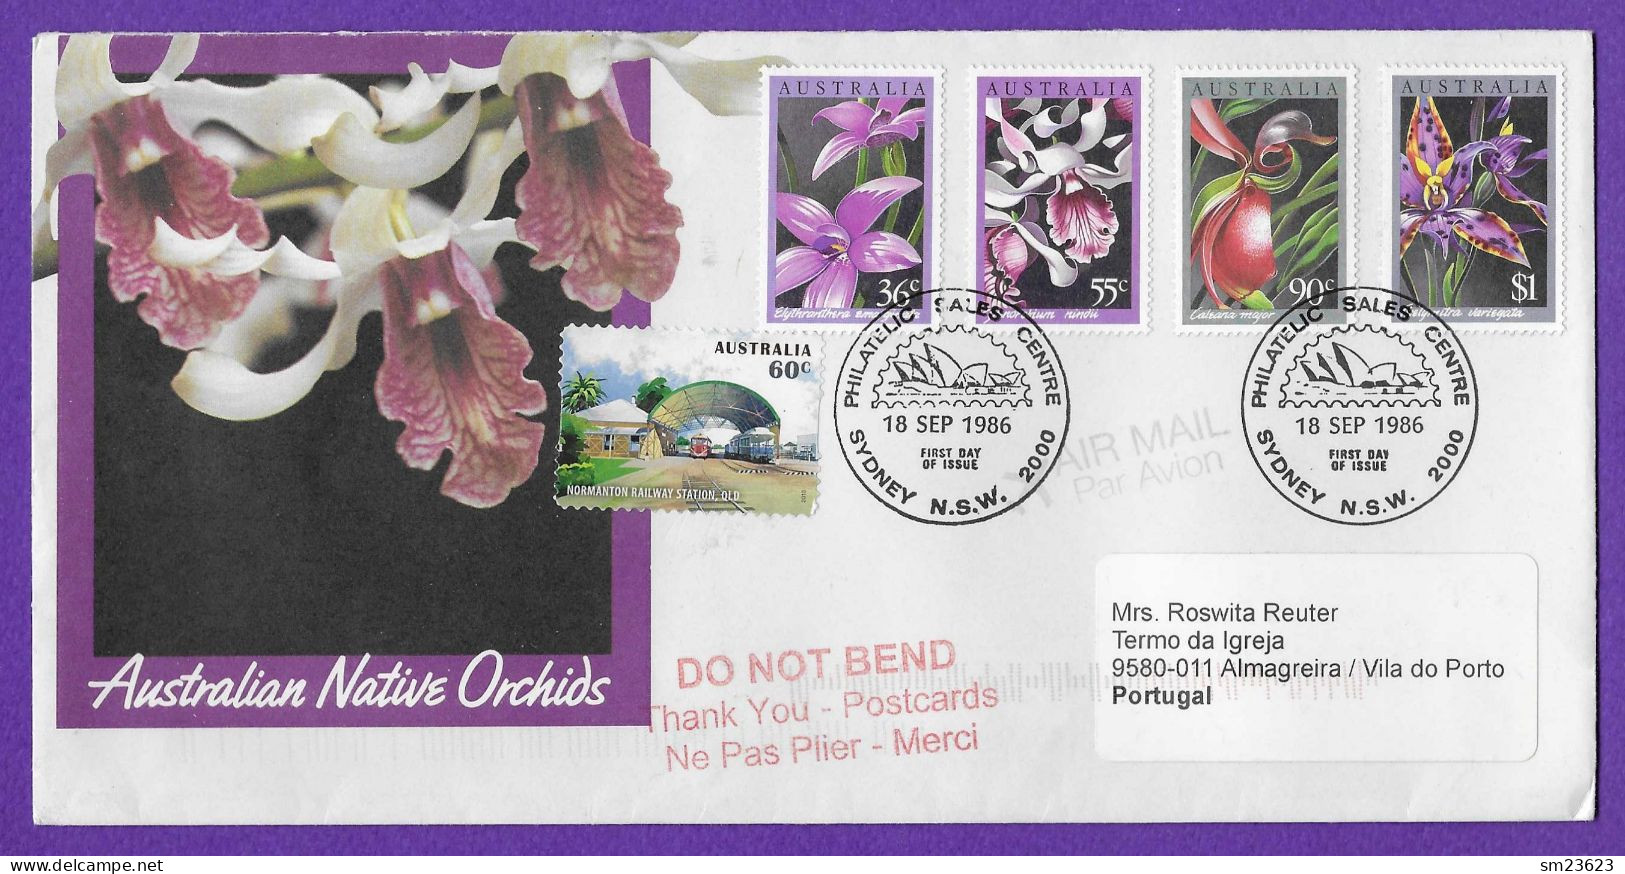 Australien 1986  Mi.Nr. 997 / 1000 , Orchideen - First Day Of Issue 18 SEP 1986 - Sobre Primer Día (FDC)